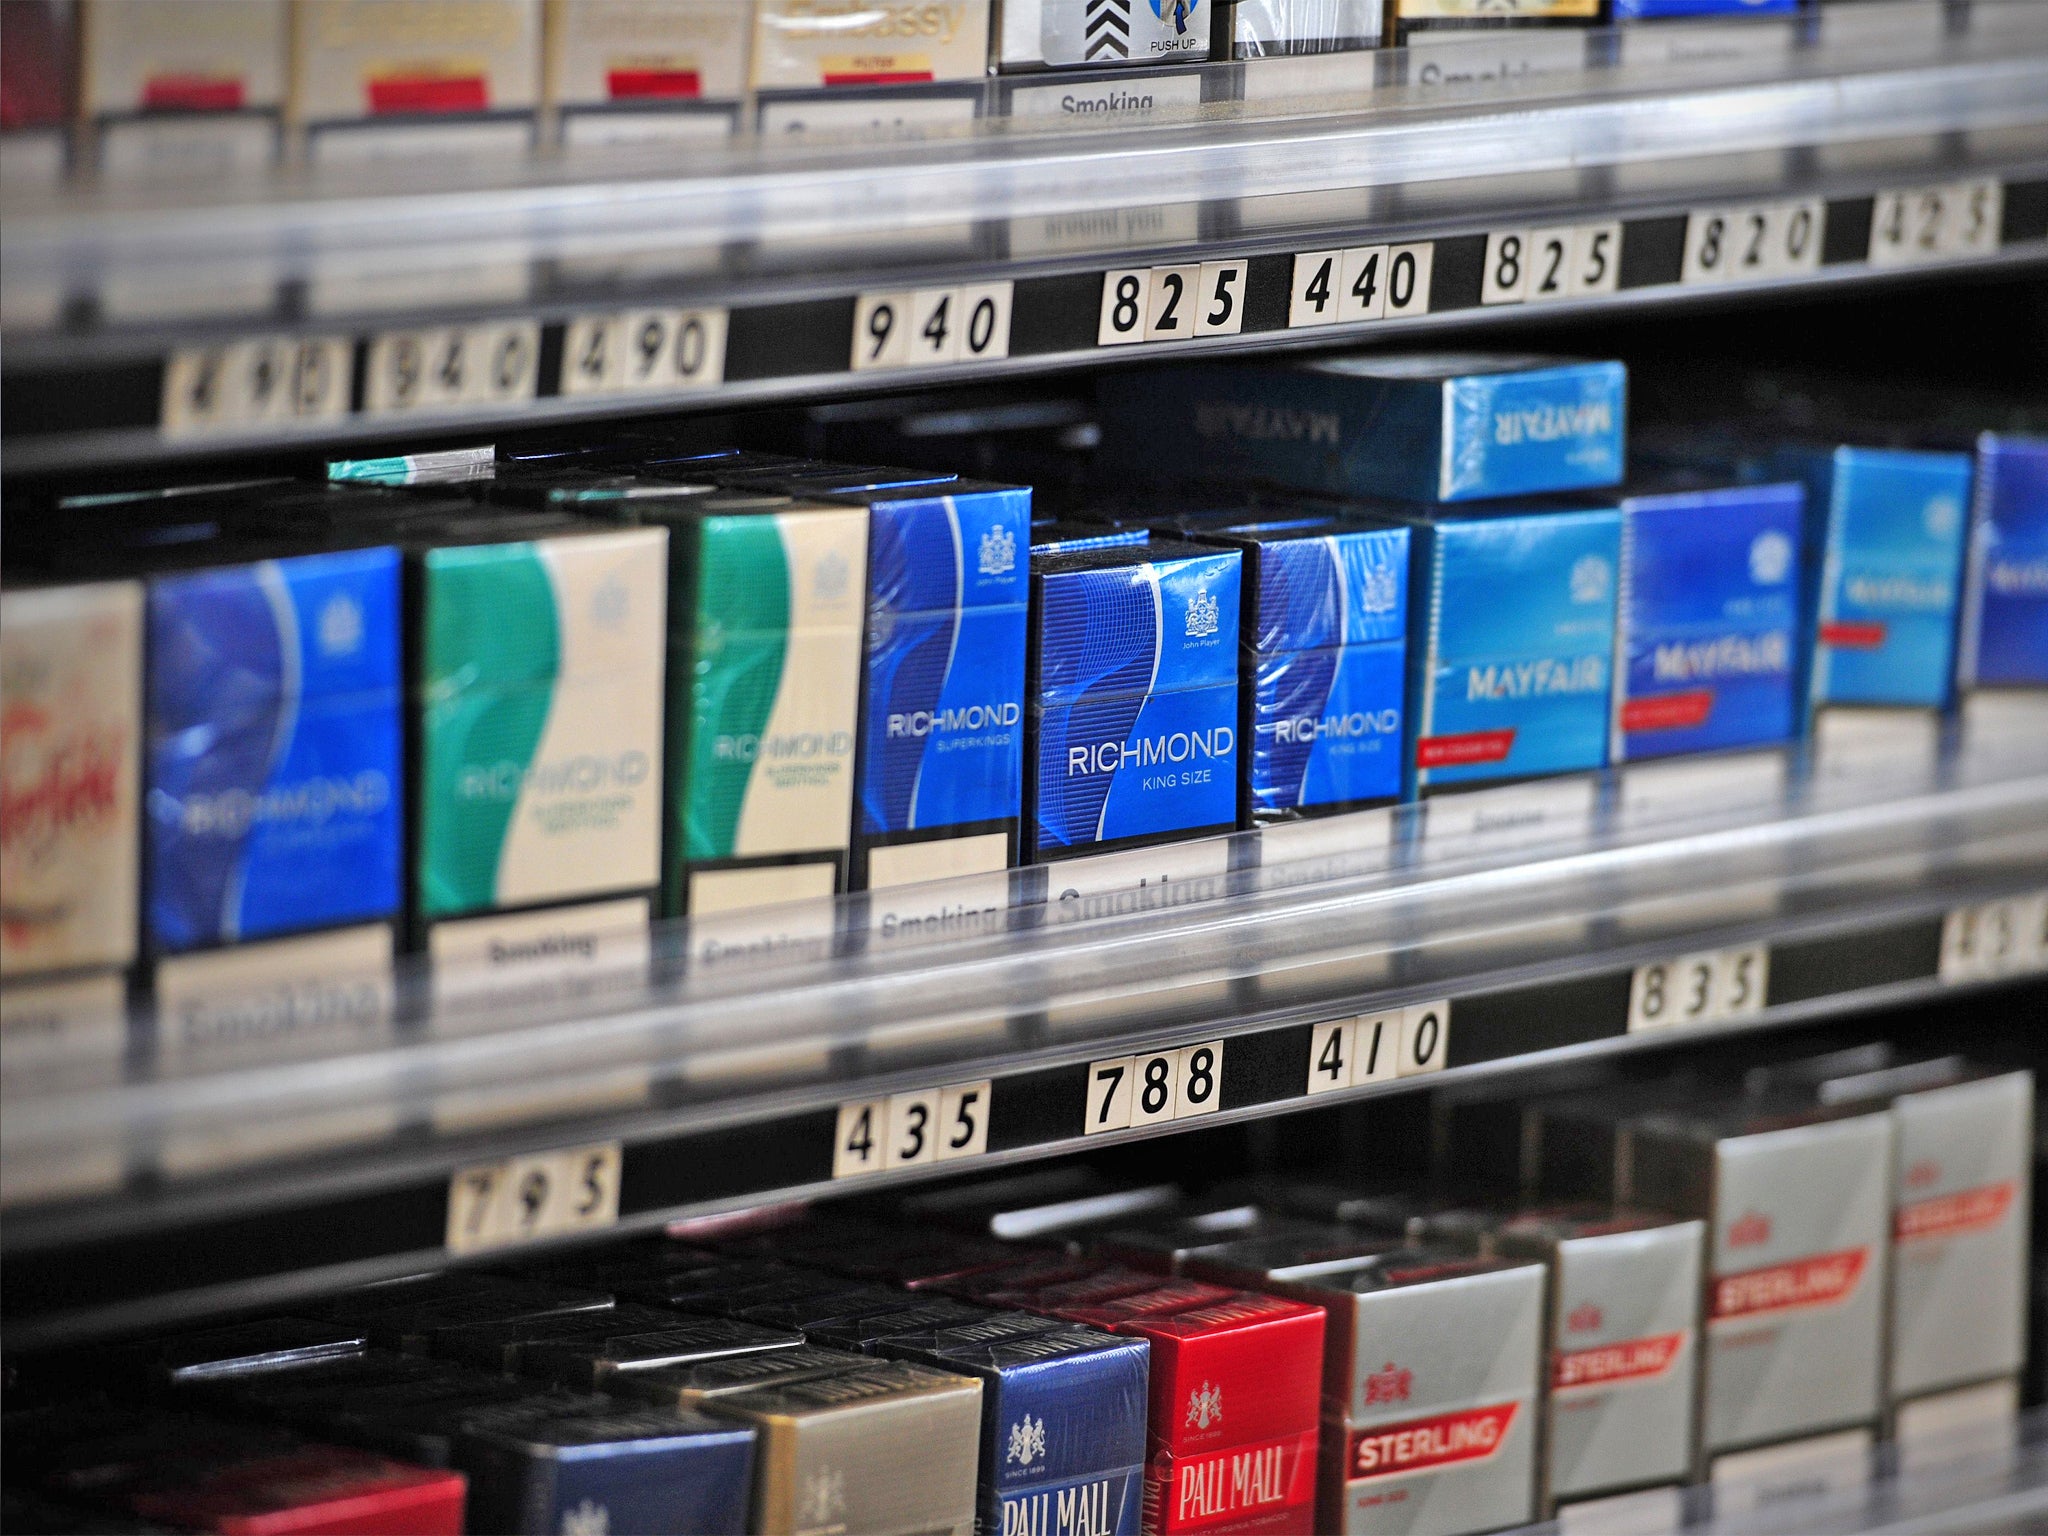 Tobacco manufacturers have been accused of producing packaging aimed at attracting young smokers